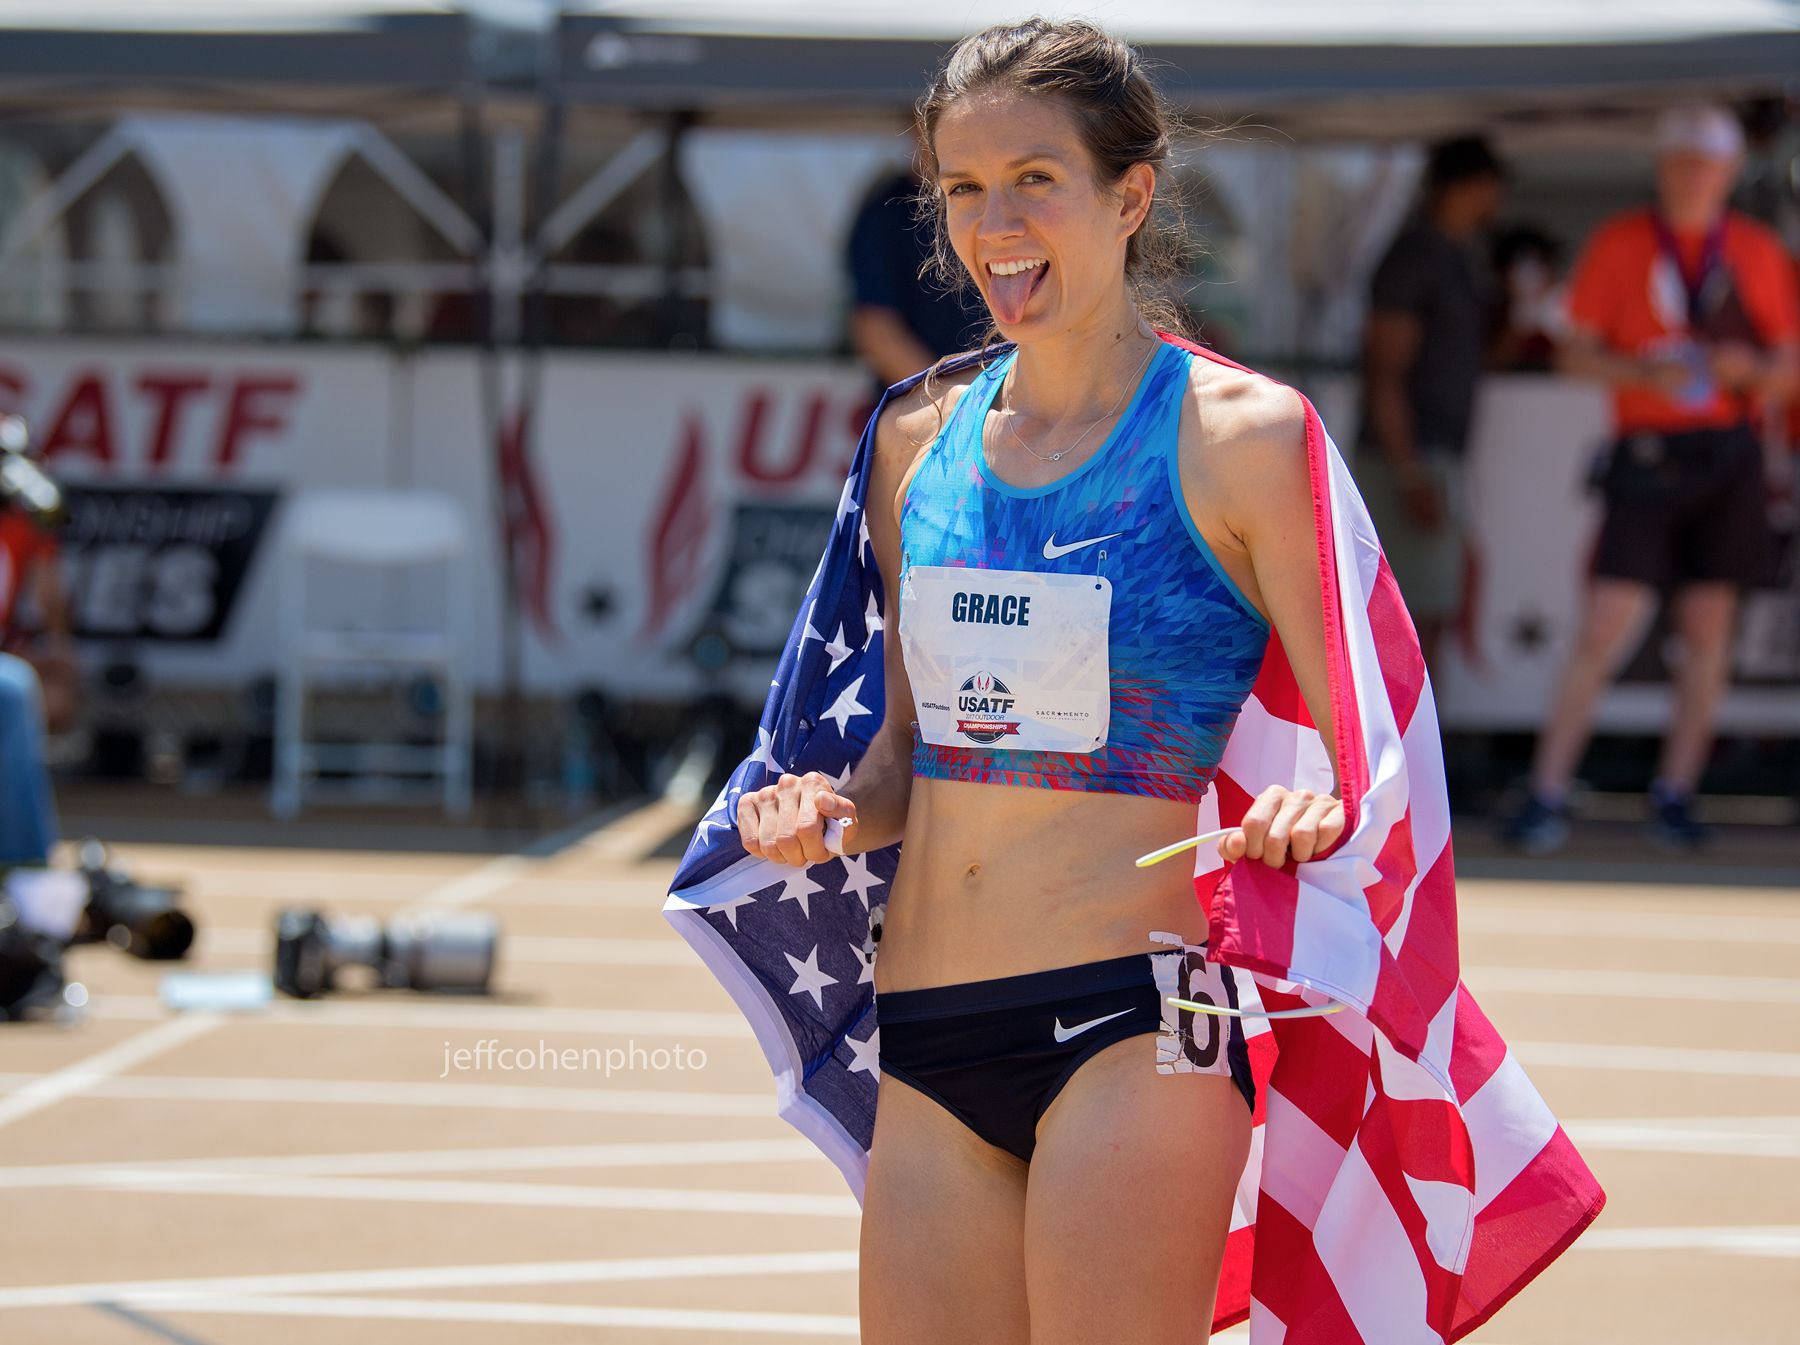 2017-usatf-outdoor-champs-day-3-grace-800w-tongue-jeff-cohen-photo--3954-web.jpg